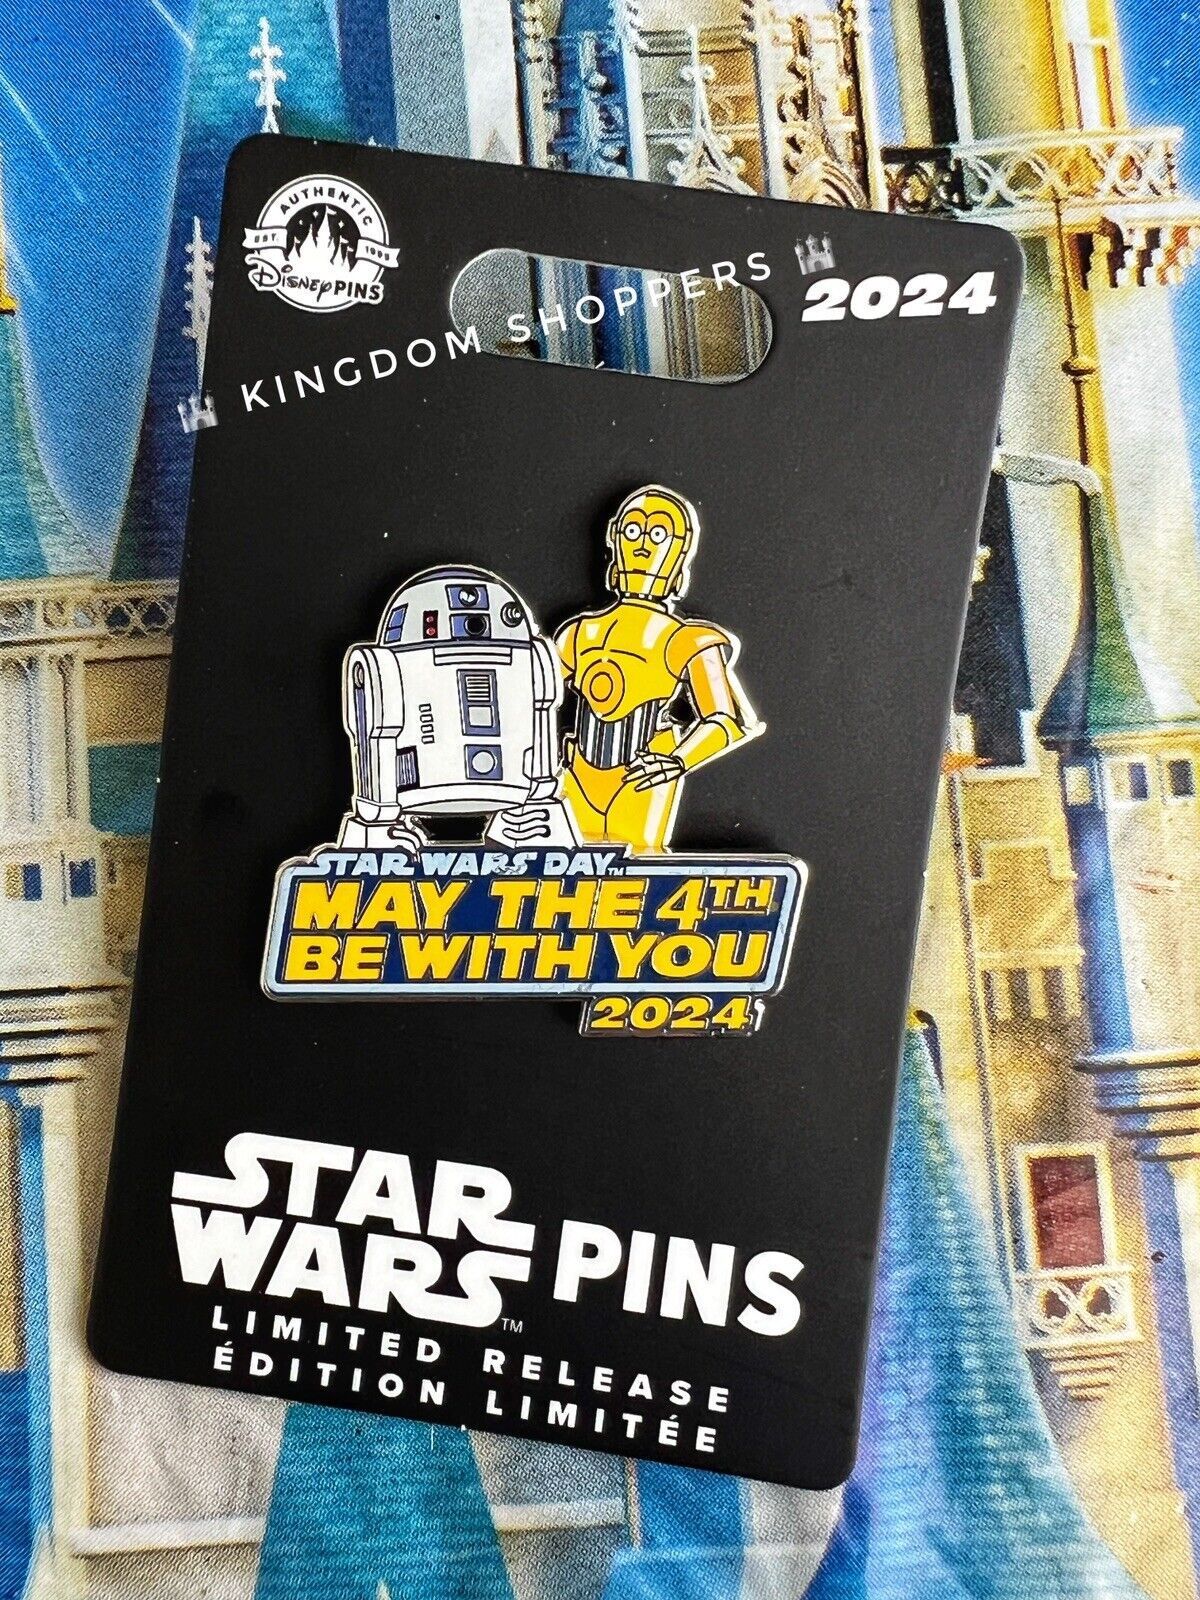 2024 Disney Parks Star Wars R2-D2 & C-3PO May the 4th Be With You Pin LR